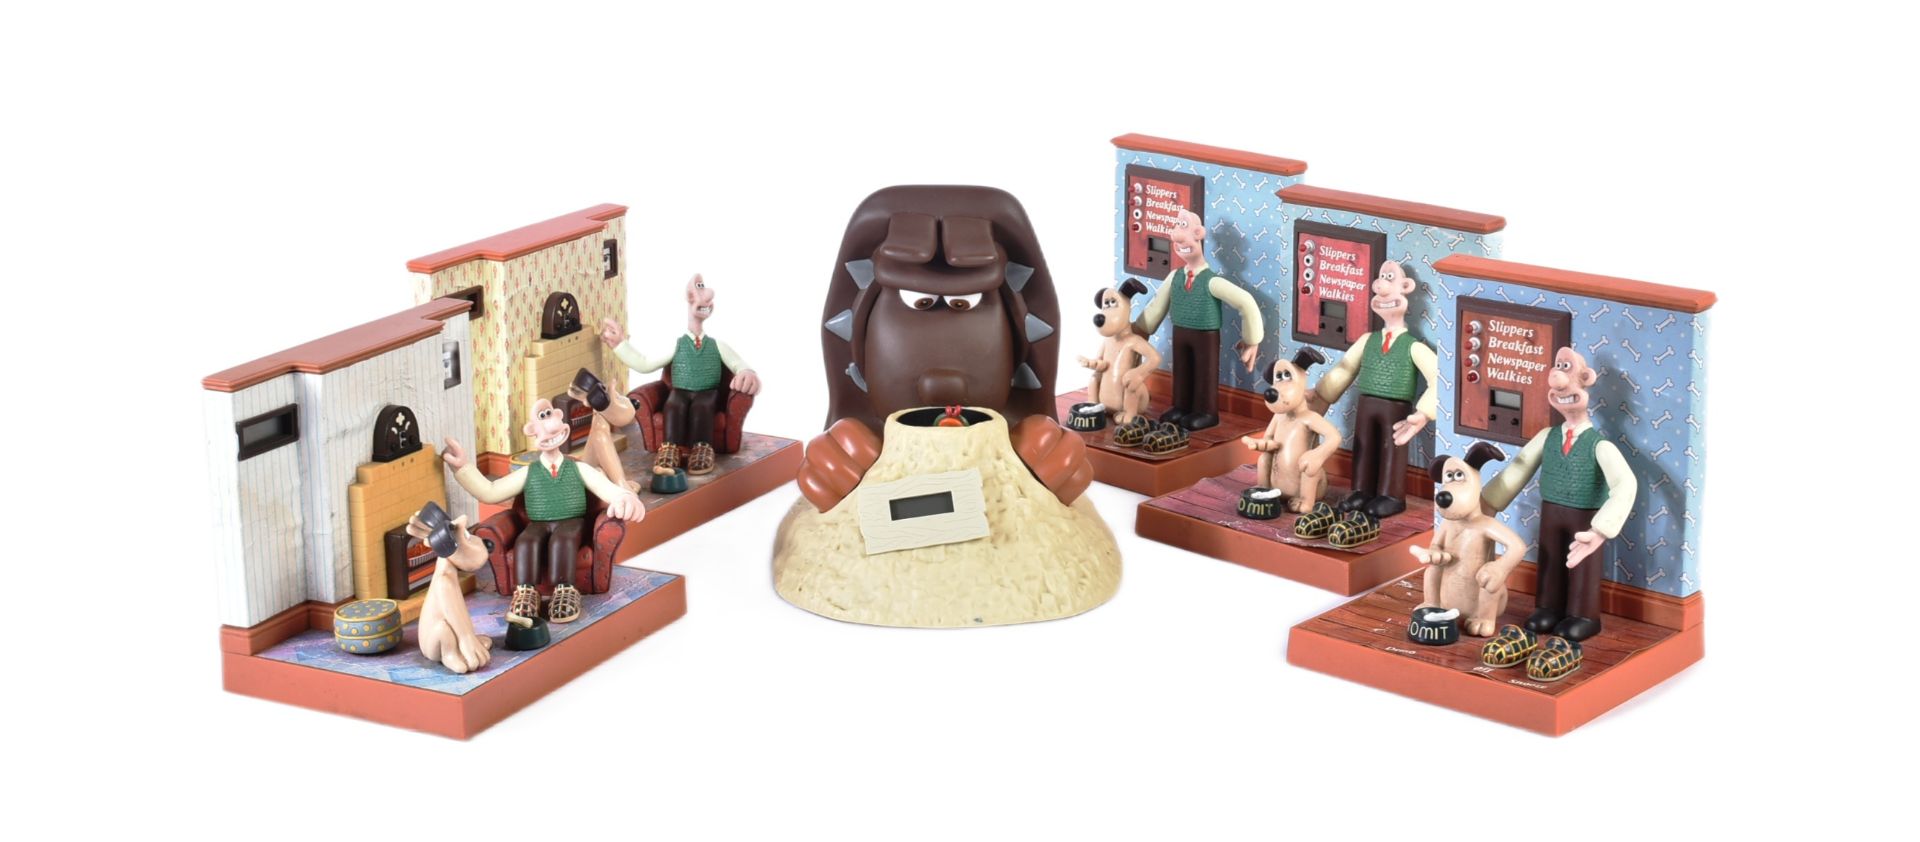 COLLECTION OF WESCO WALLACE & GROMIT DIGITAL ALARM CLOCKS